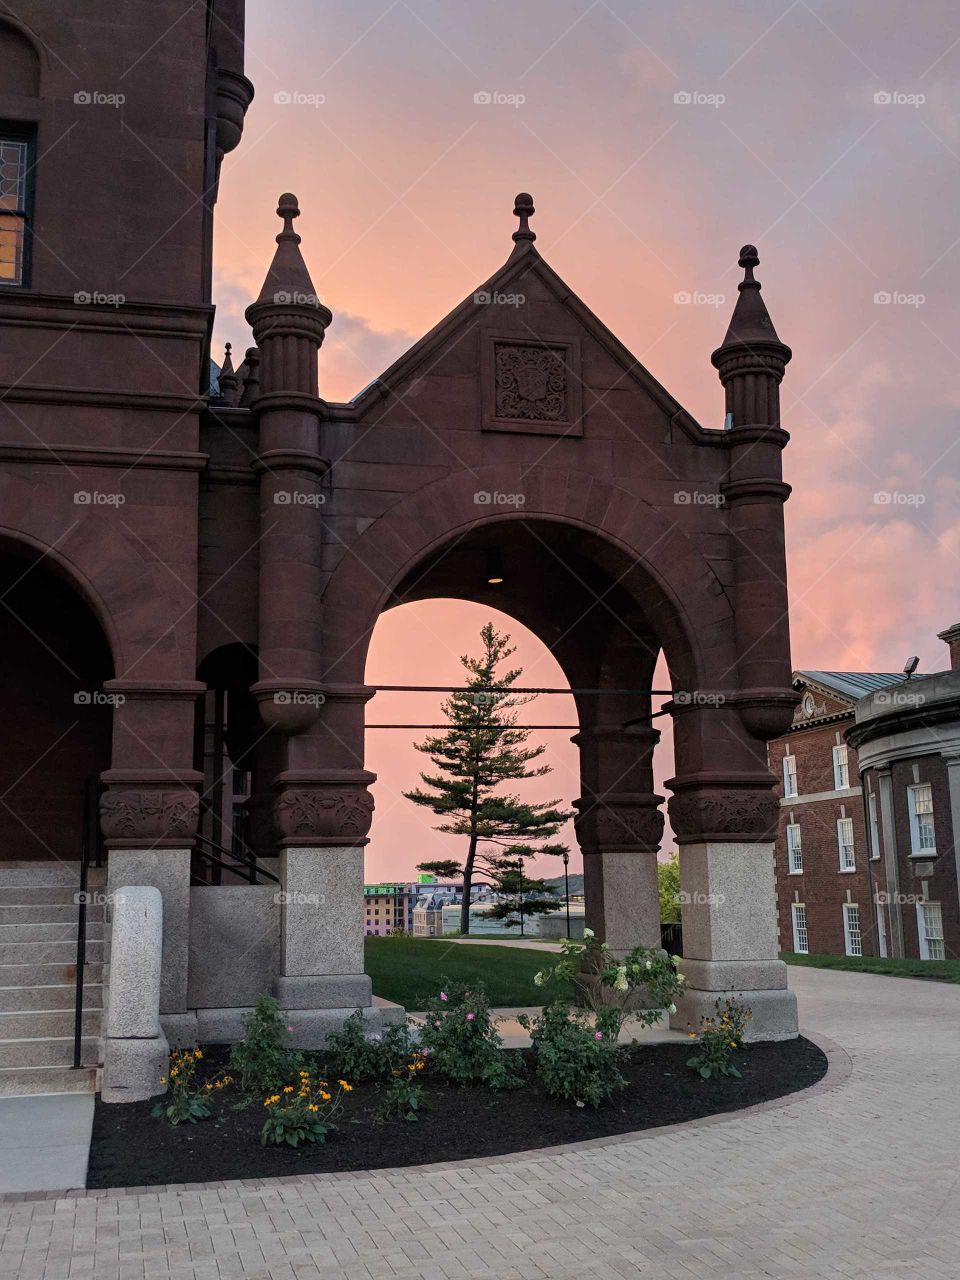 Beautiful, Ornate Brick Arch/Building at Sunset, Pink Skies (Crouse College, Syracuse University, New York)